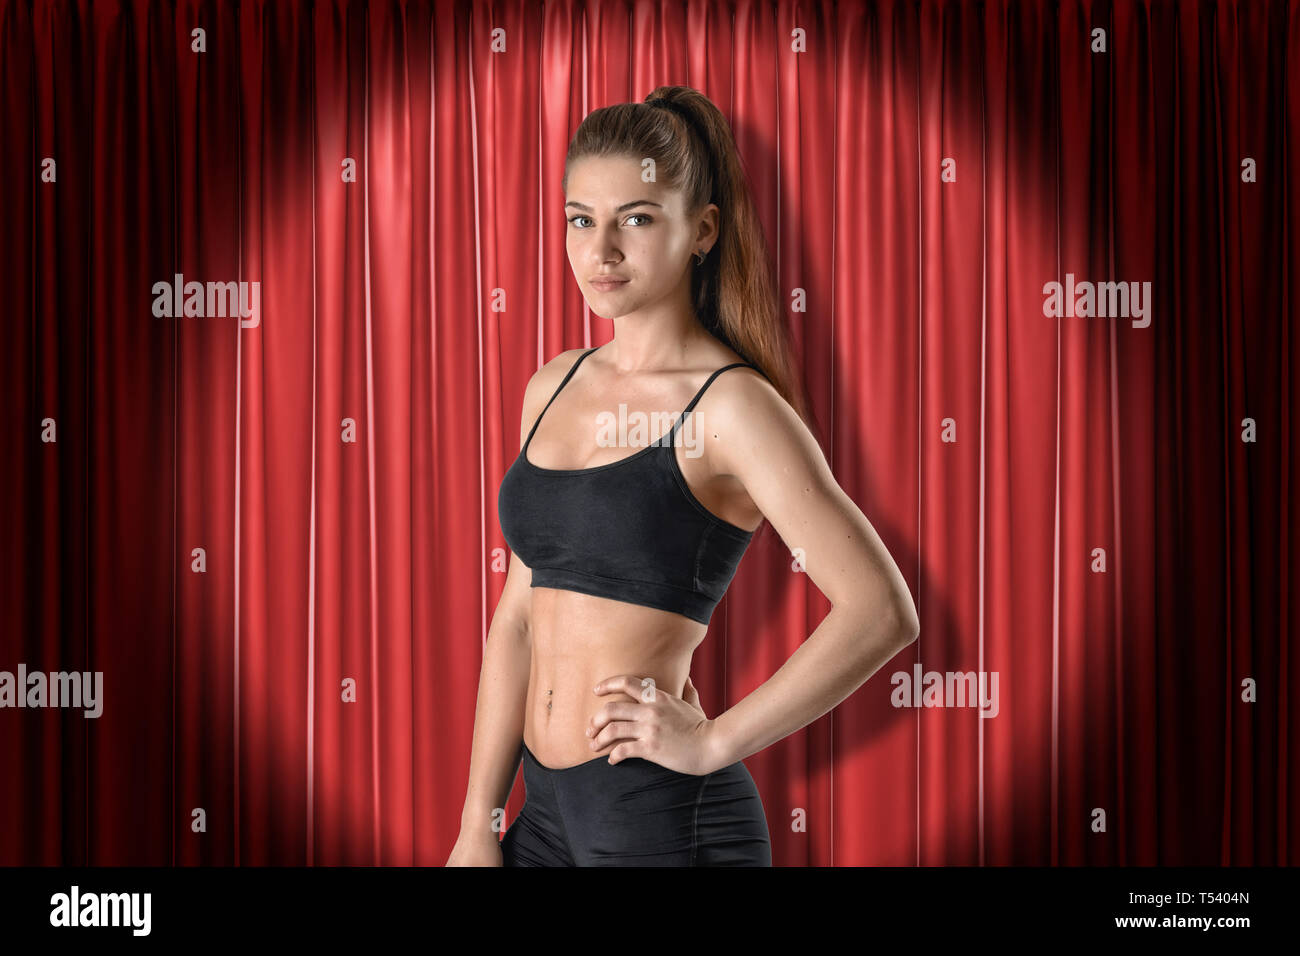 Close-up of young woman in black sport crop top and shorts standing in half-turn with one hand on hip and looking at camera against red curtain. Stock Photo